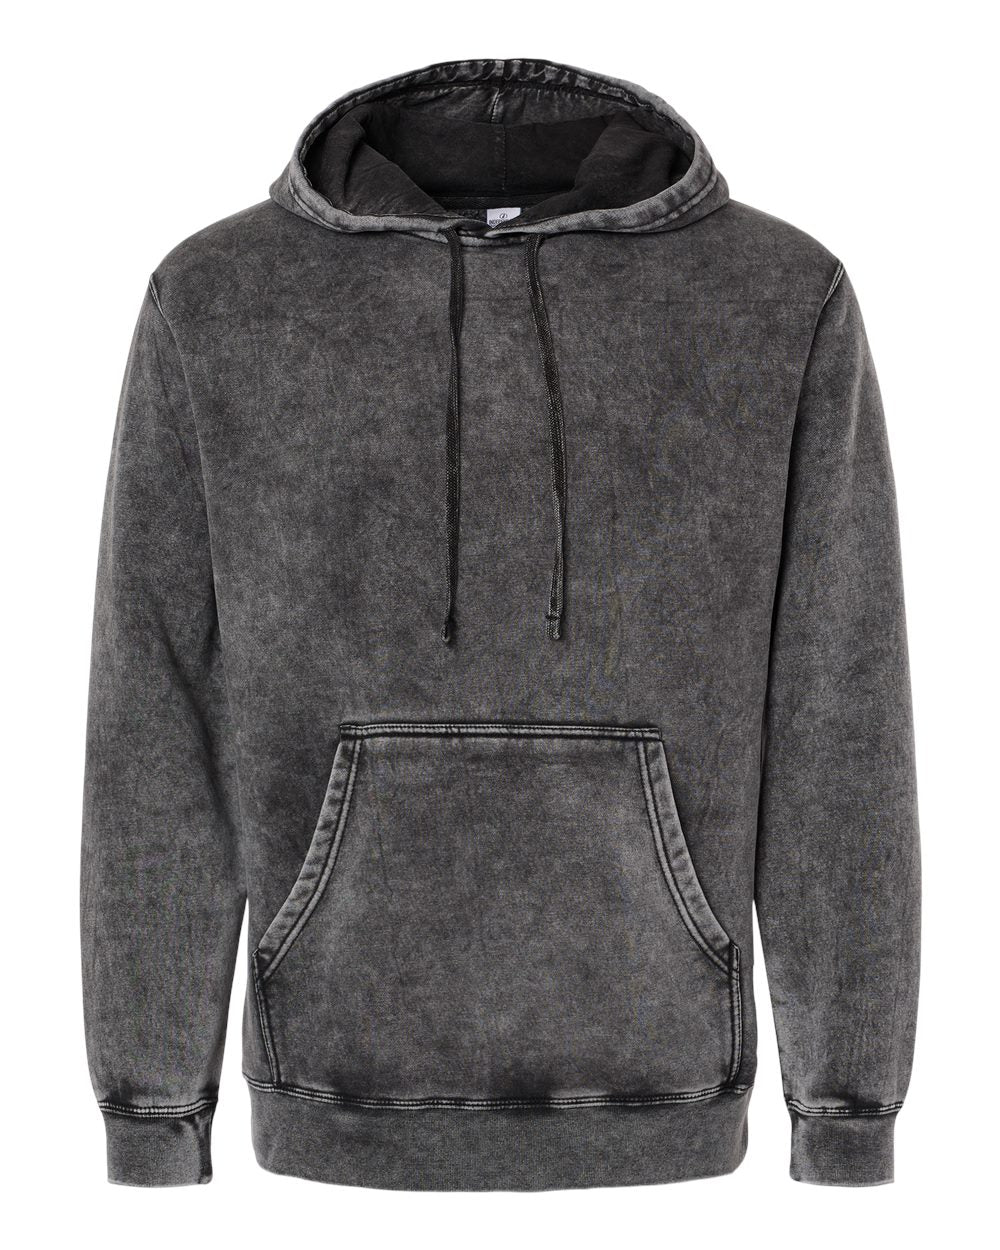 Independent Trading Co. - Midweight Mineral Wash Hooded Sweatshirt